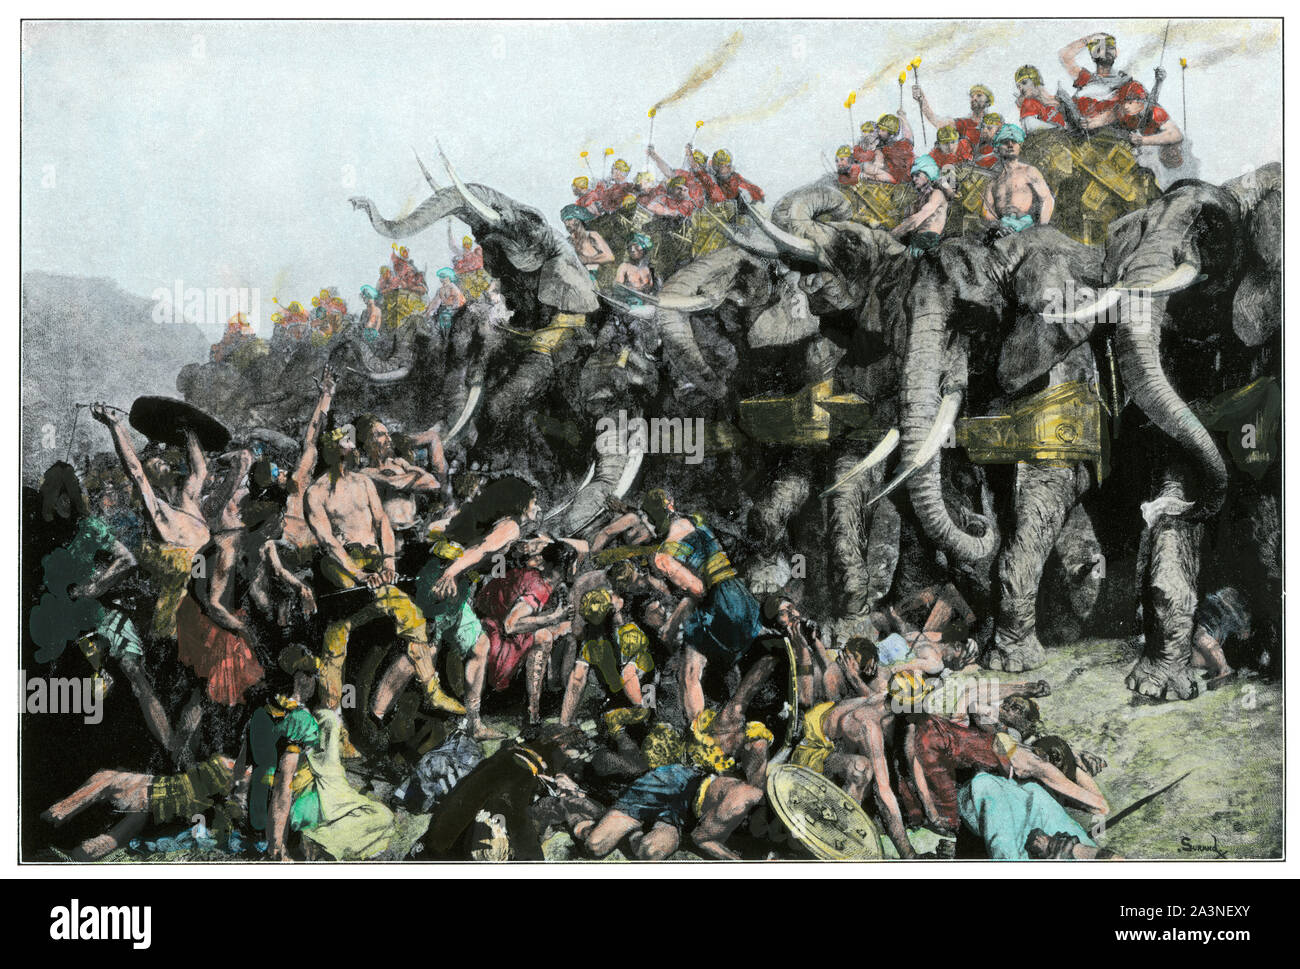 Carthaginian general Hamilcar Barca using war elephants to conquer tribesmen in Spain, 237 BC. Hand-colored halftone of a G. Surand illustration Stock Photo